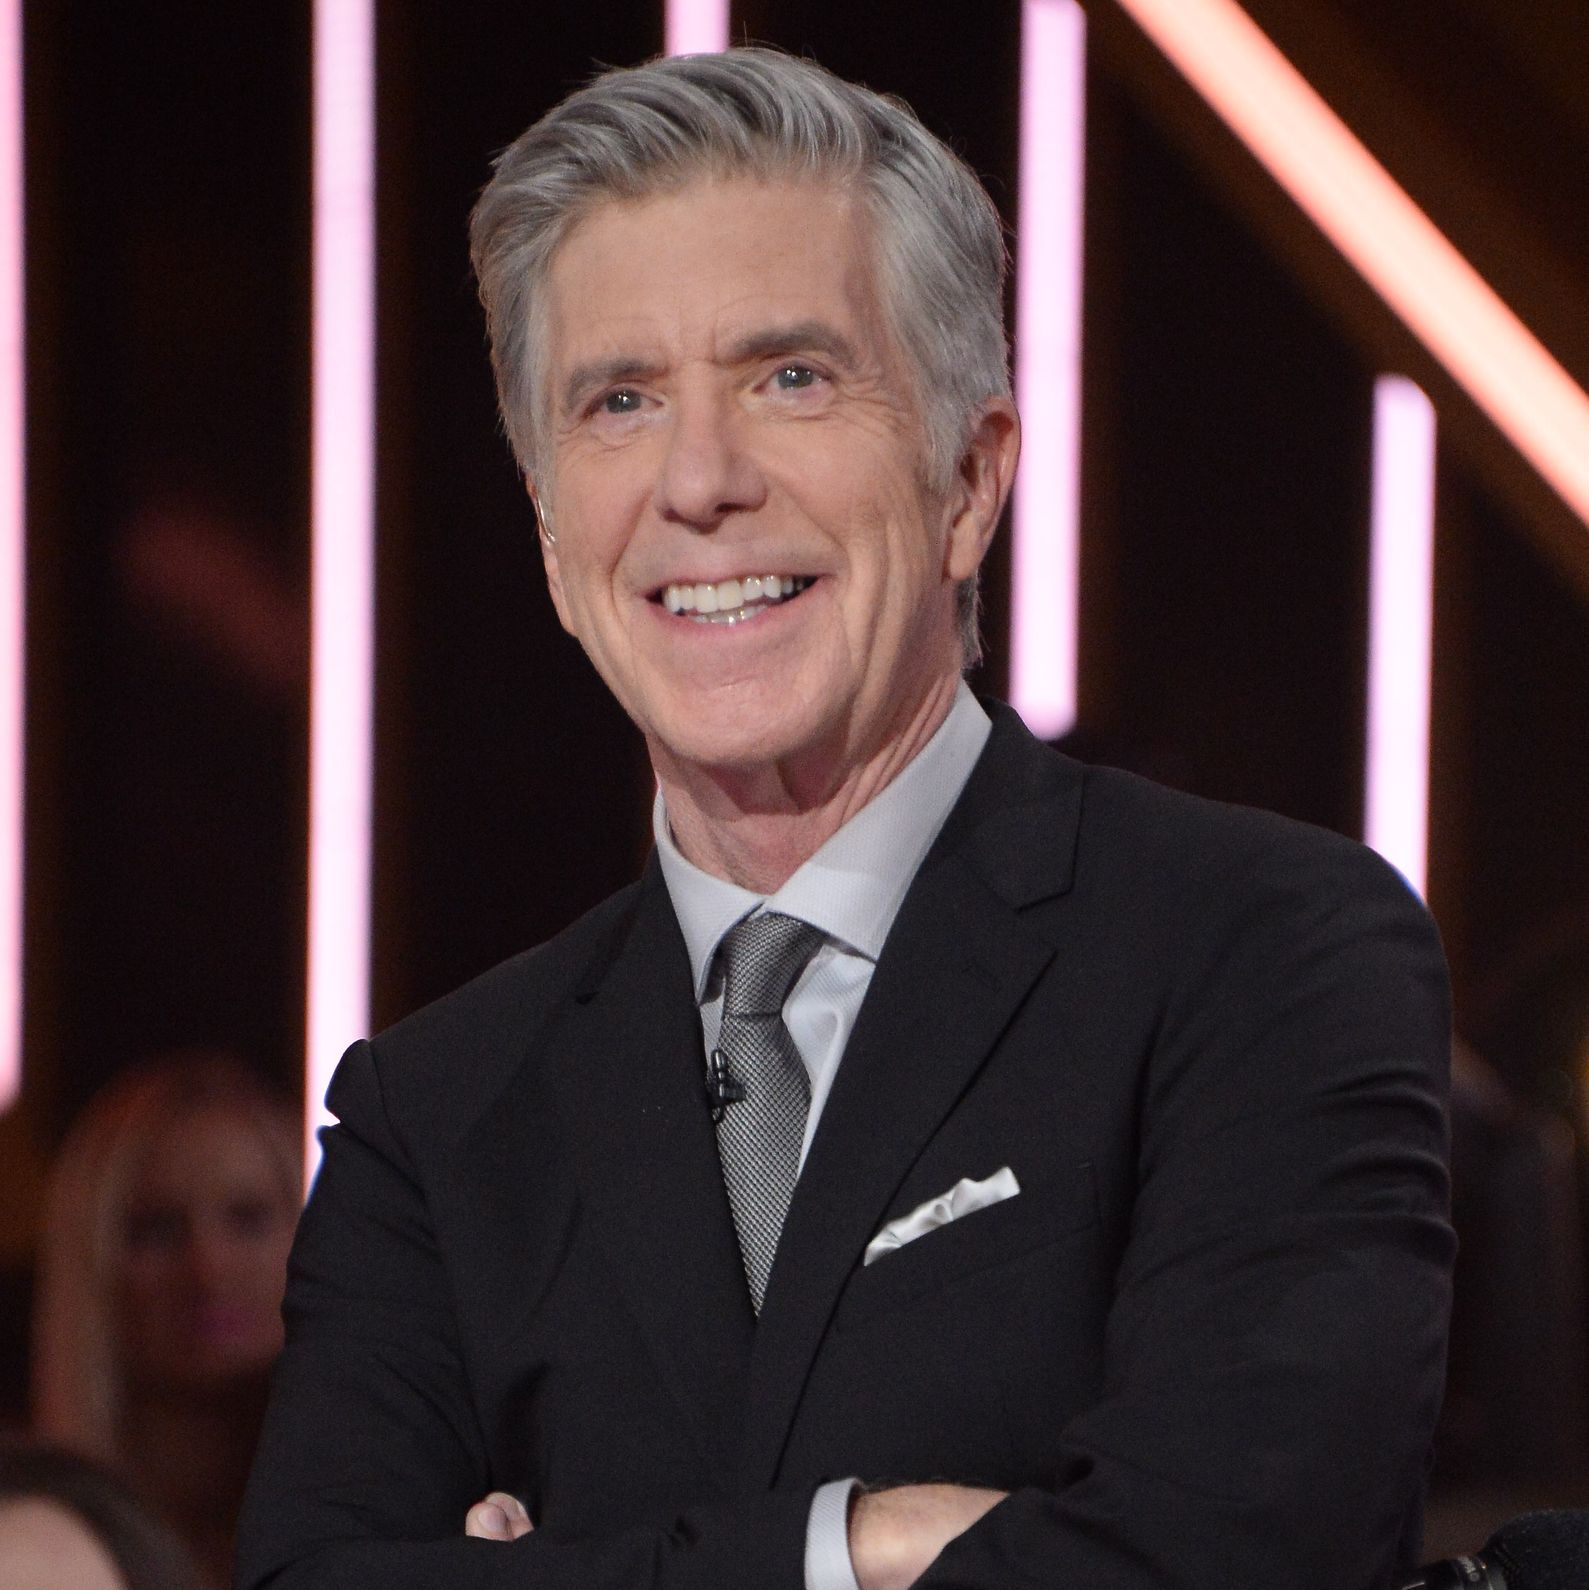 Former 'Dancing With the Stars' Host Tom Bergeron Says Producers 